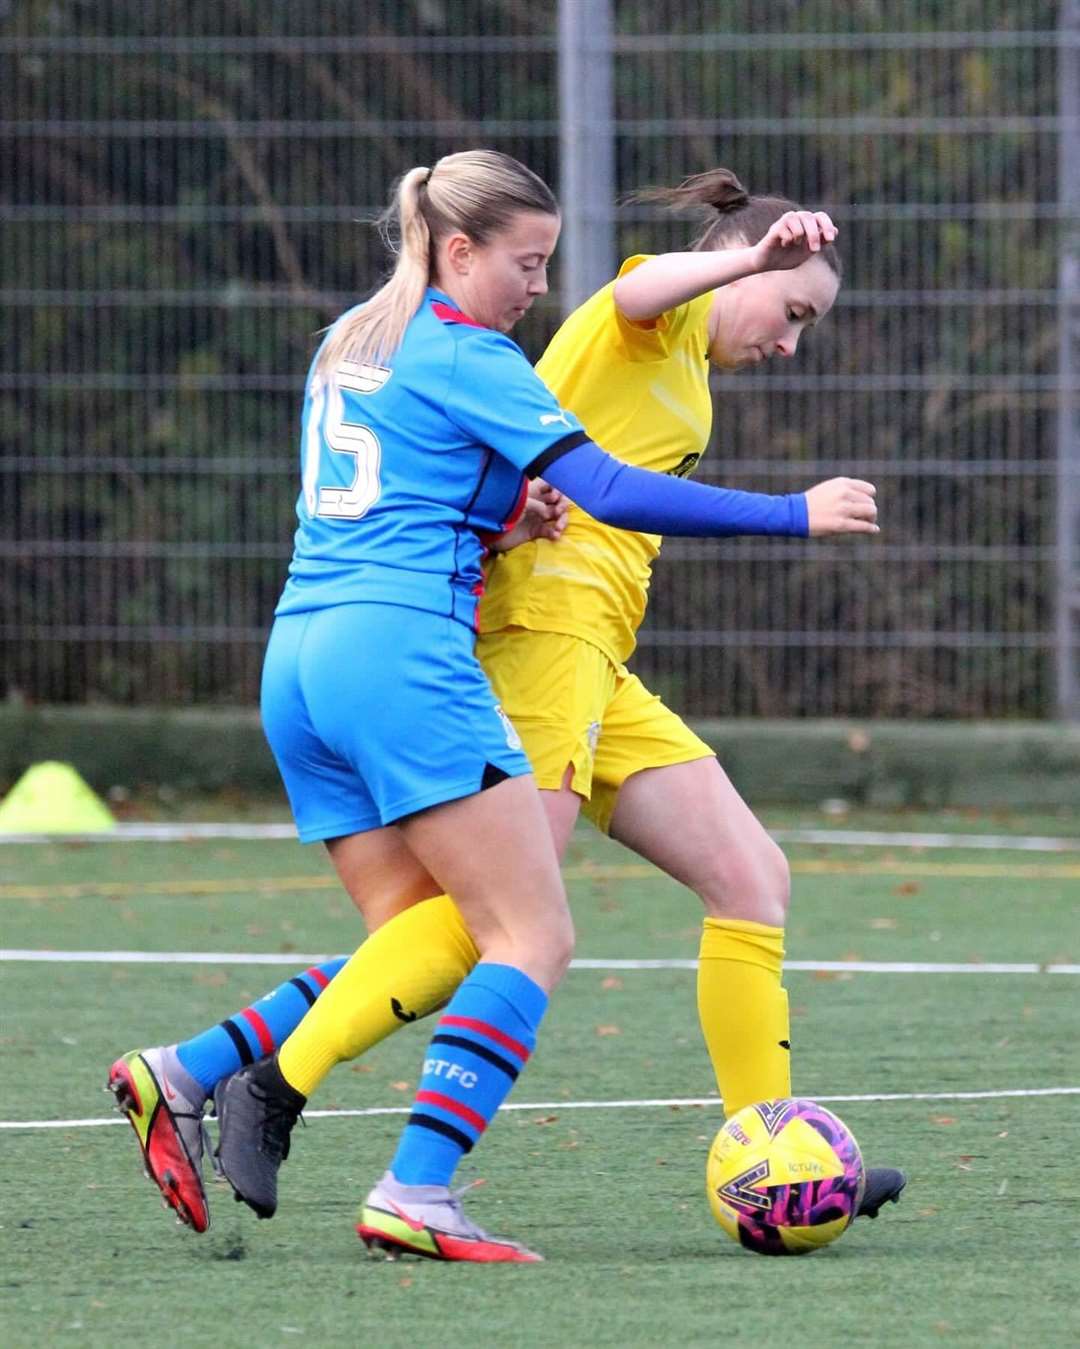 Rhea Hossack in action. Inverness Caley Thistle (ICT) Women beat Morton 9-0. Picture: Becky Dingwall (free to use).